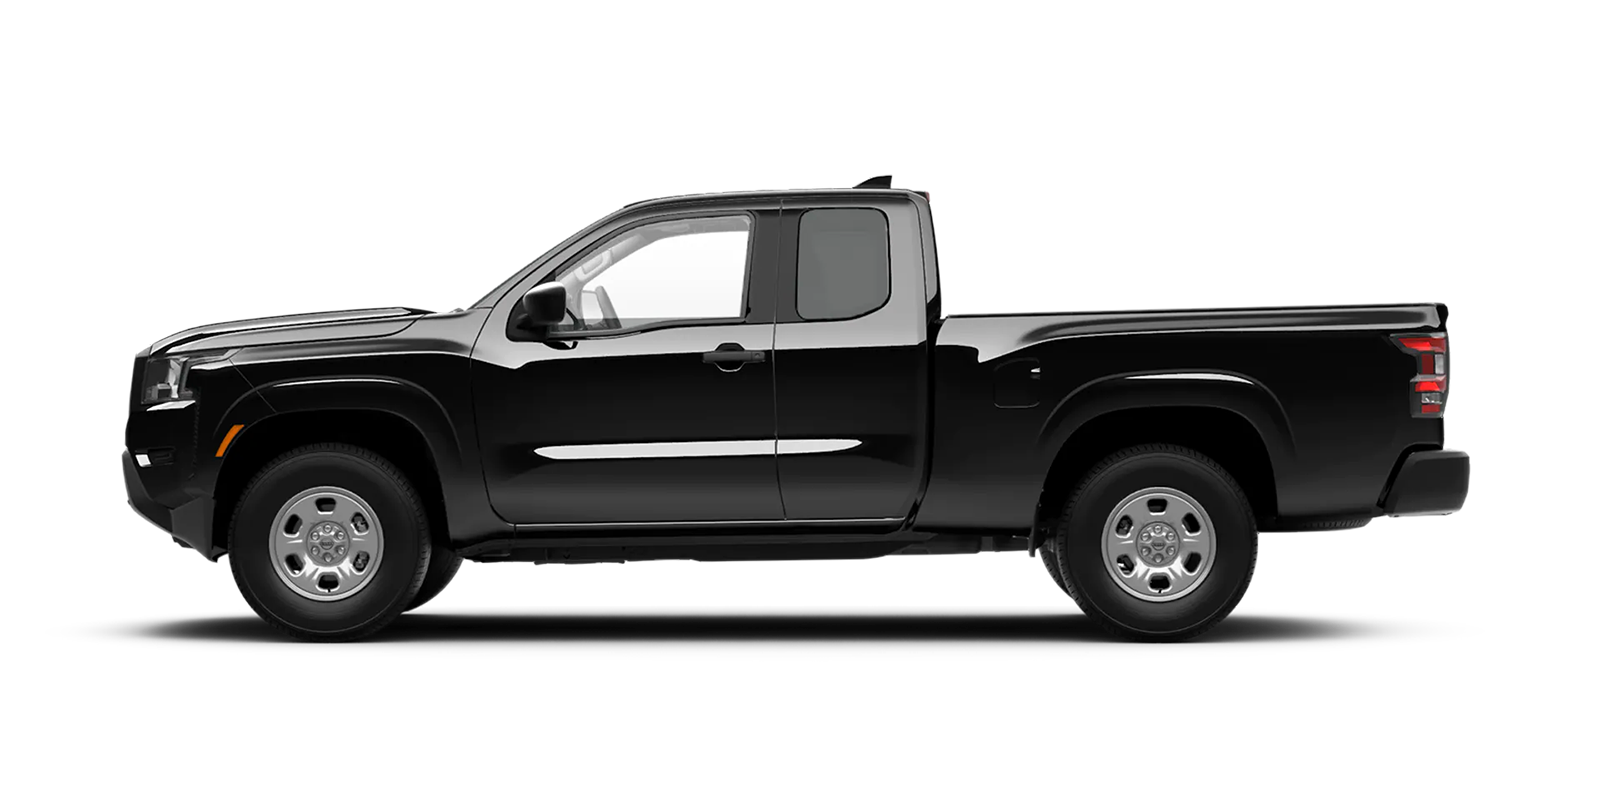 2022 Frontier King Cab S 4x2 in Super Black | Courtesy Nissan PA in Altoona PA